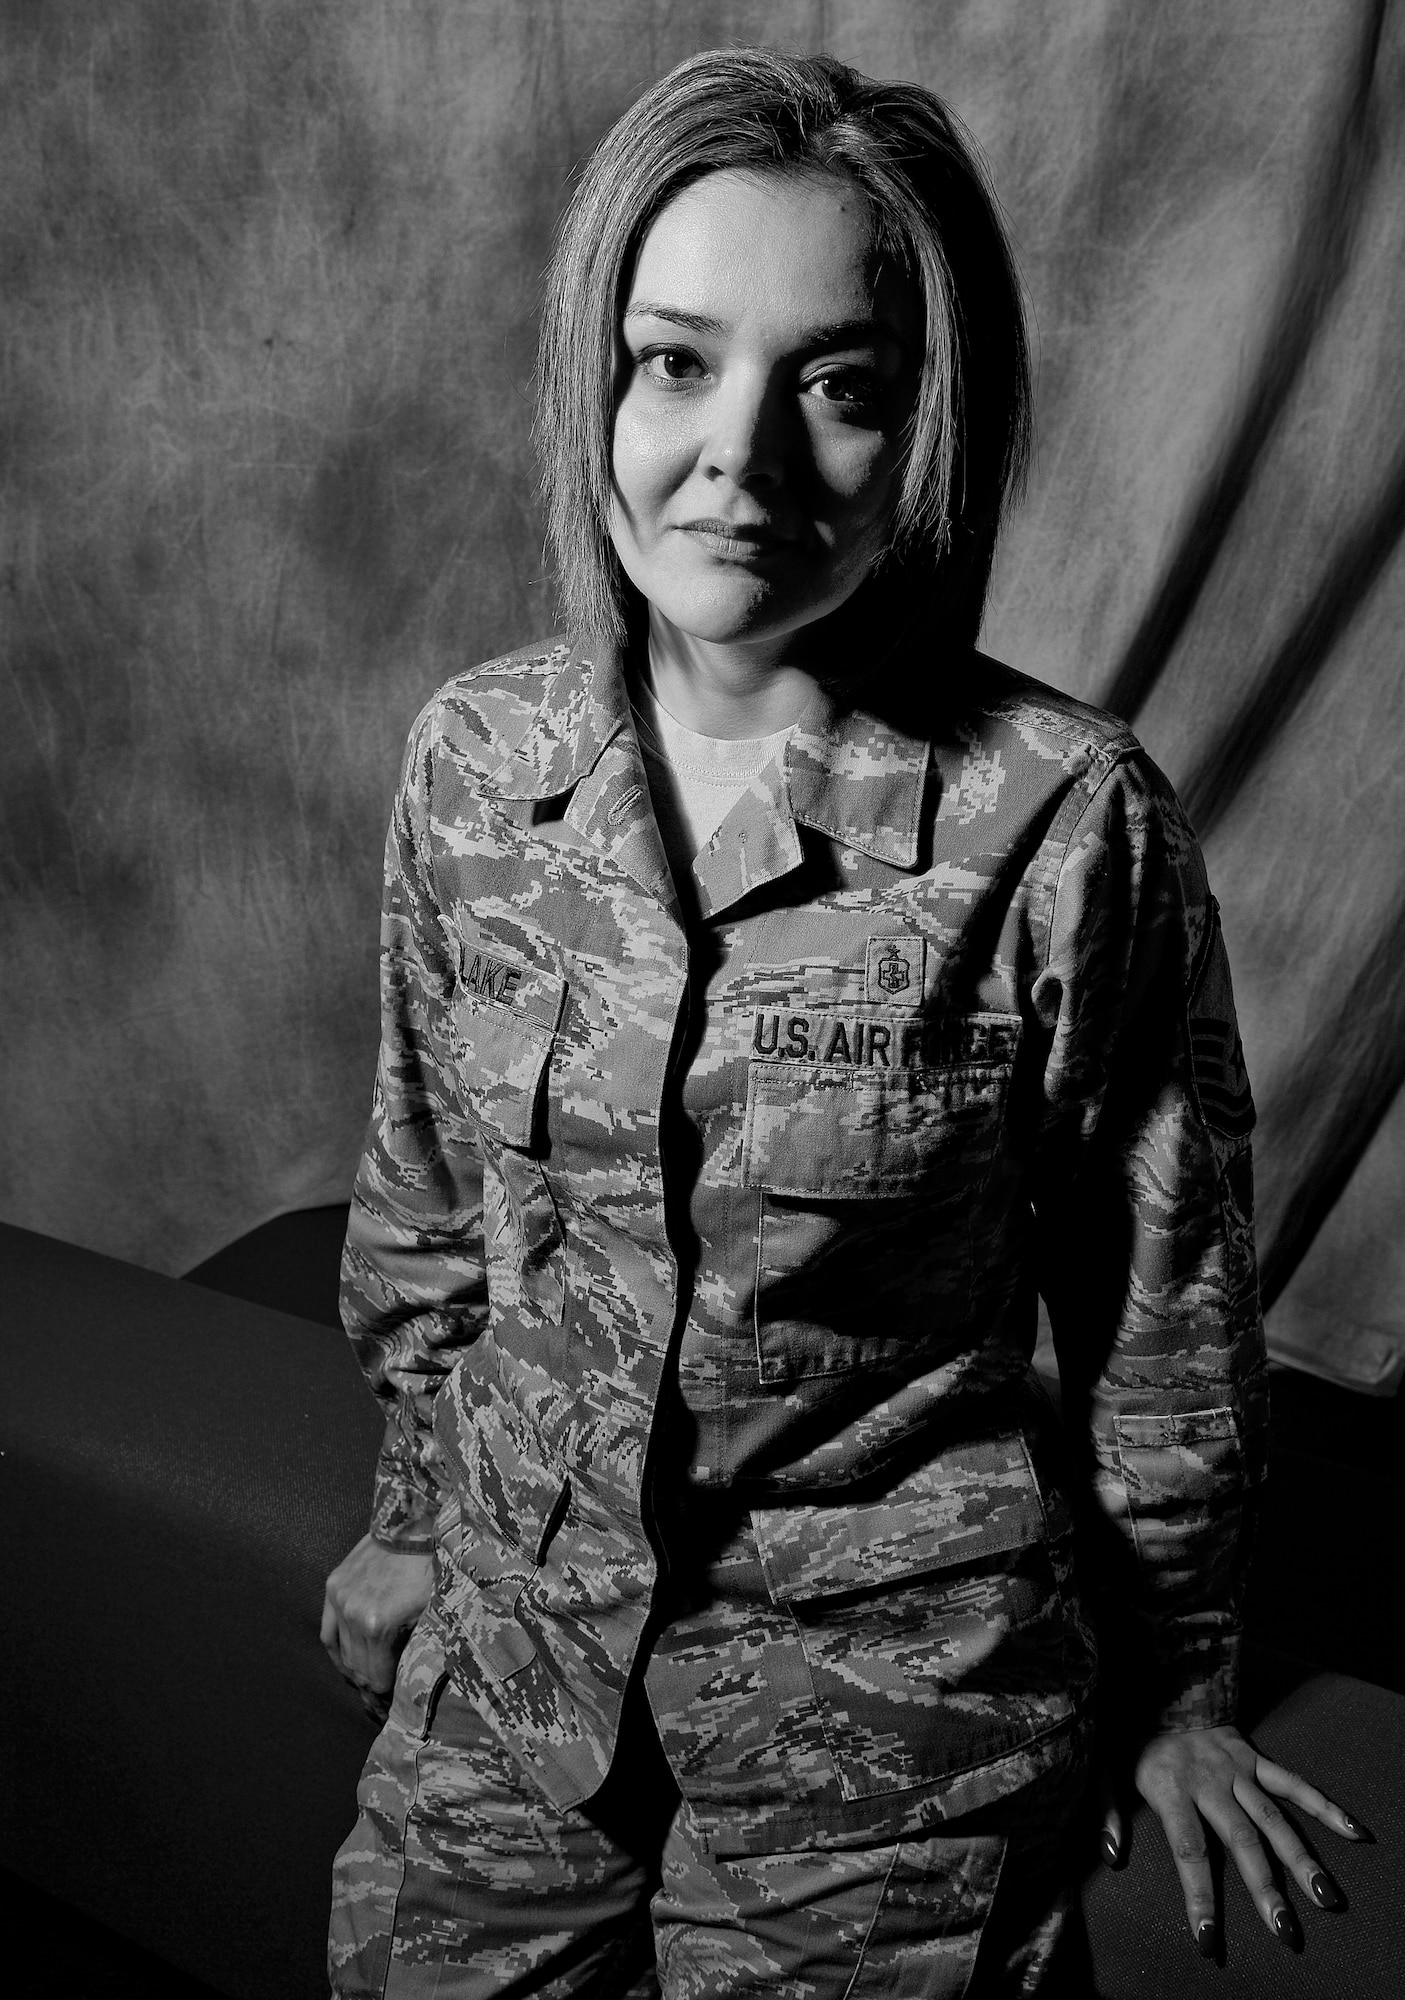 ROYAL AIR FORCE LAKENHEATH, England—Master Sgt. Michelle Blake, 48th Medical Group flight chief for medical readiness, is being featured during Sexual Assault Awareness Month. Blake wanted to share her story in hopes that other women will speak up about sexual assault. (U.S. Air Force photo by Staff Sgt. Stephanie Mancha)